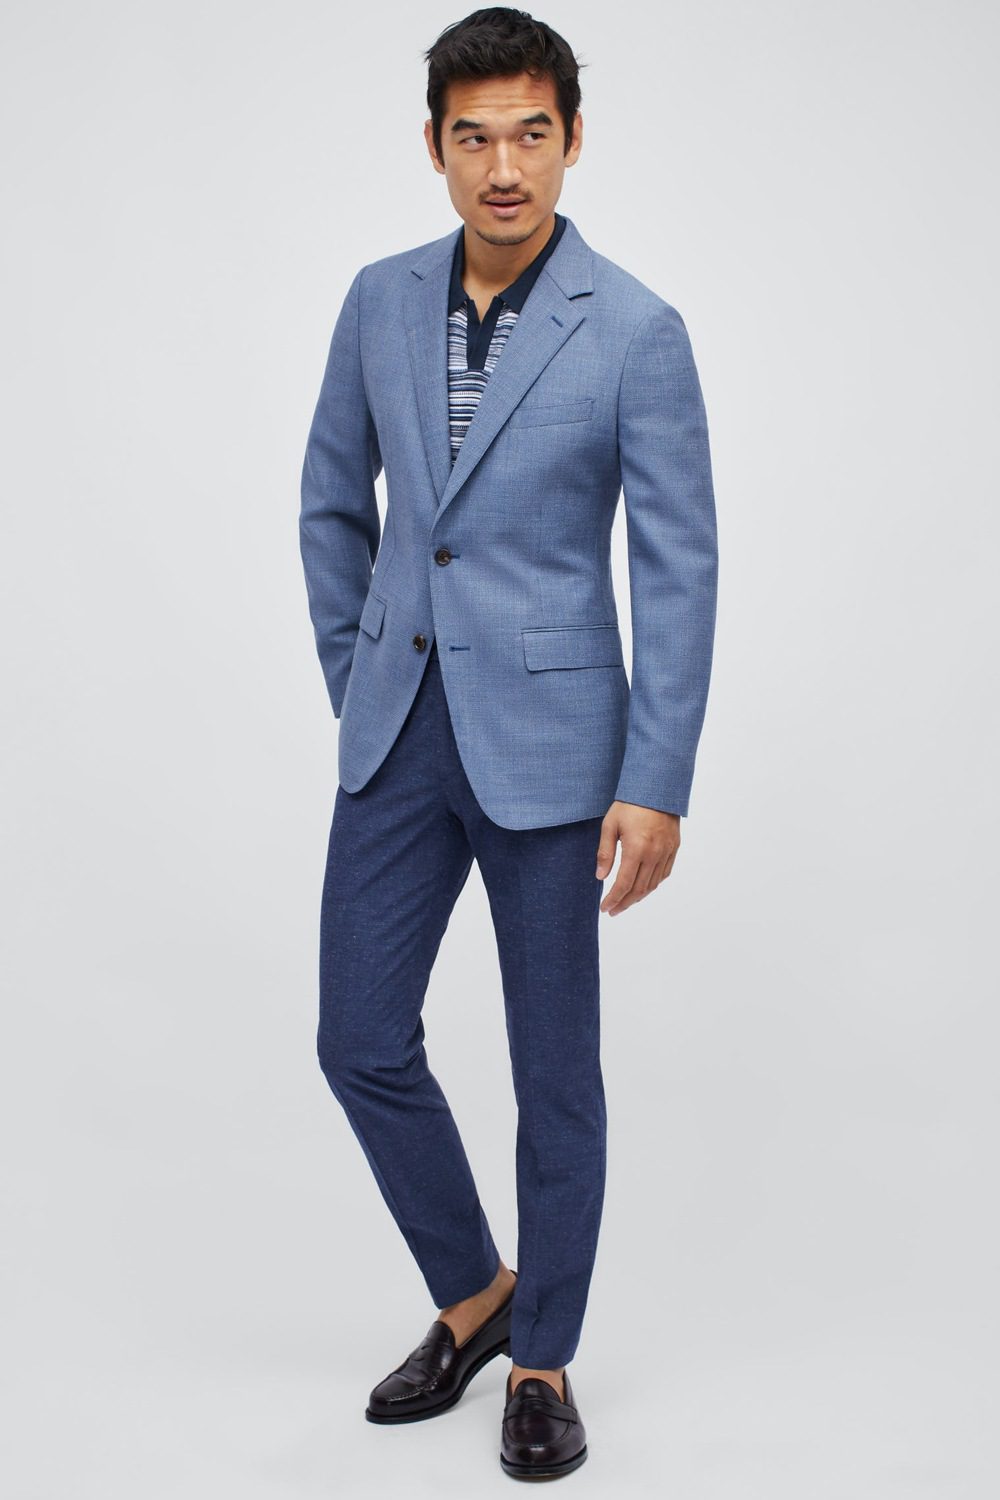 Discover more than 75 suit pants with sport coat latest